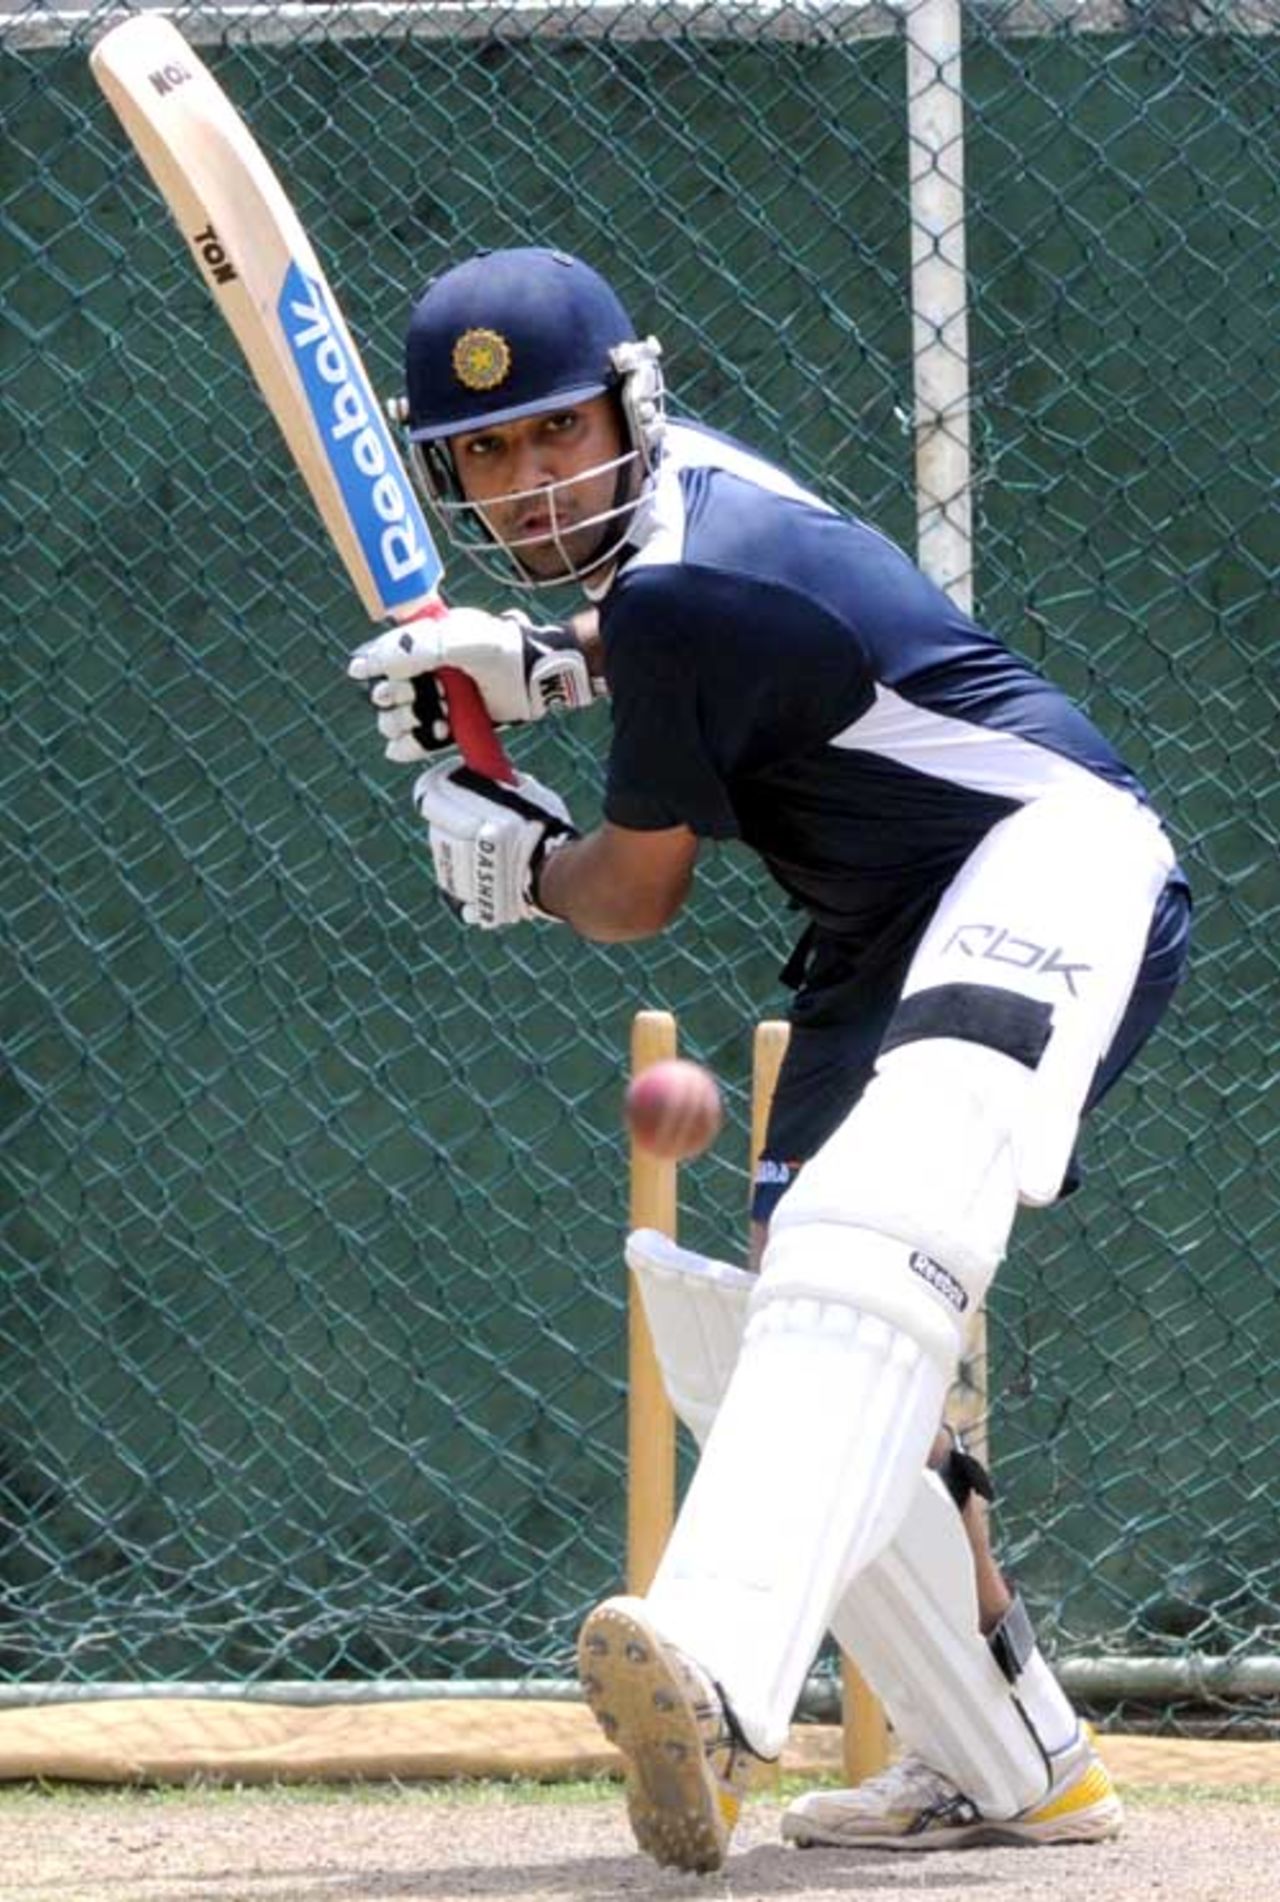 Rohit Sharma gets in line to play a shot in the nets, Colombo, July 21, 2008